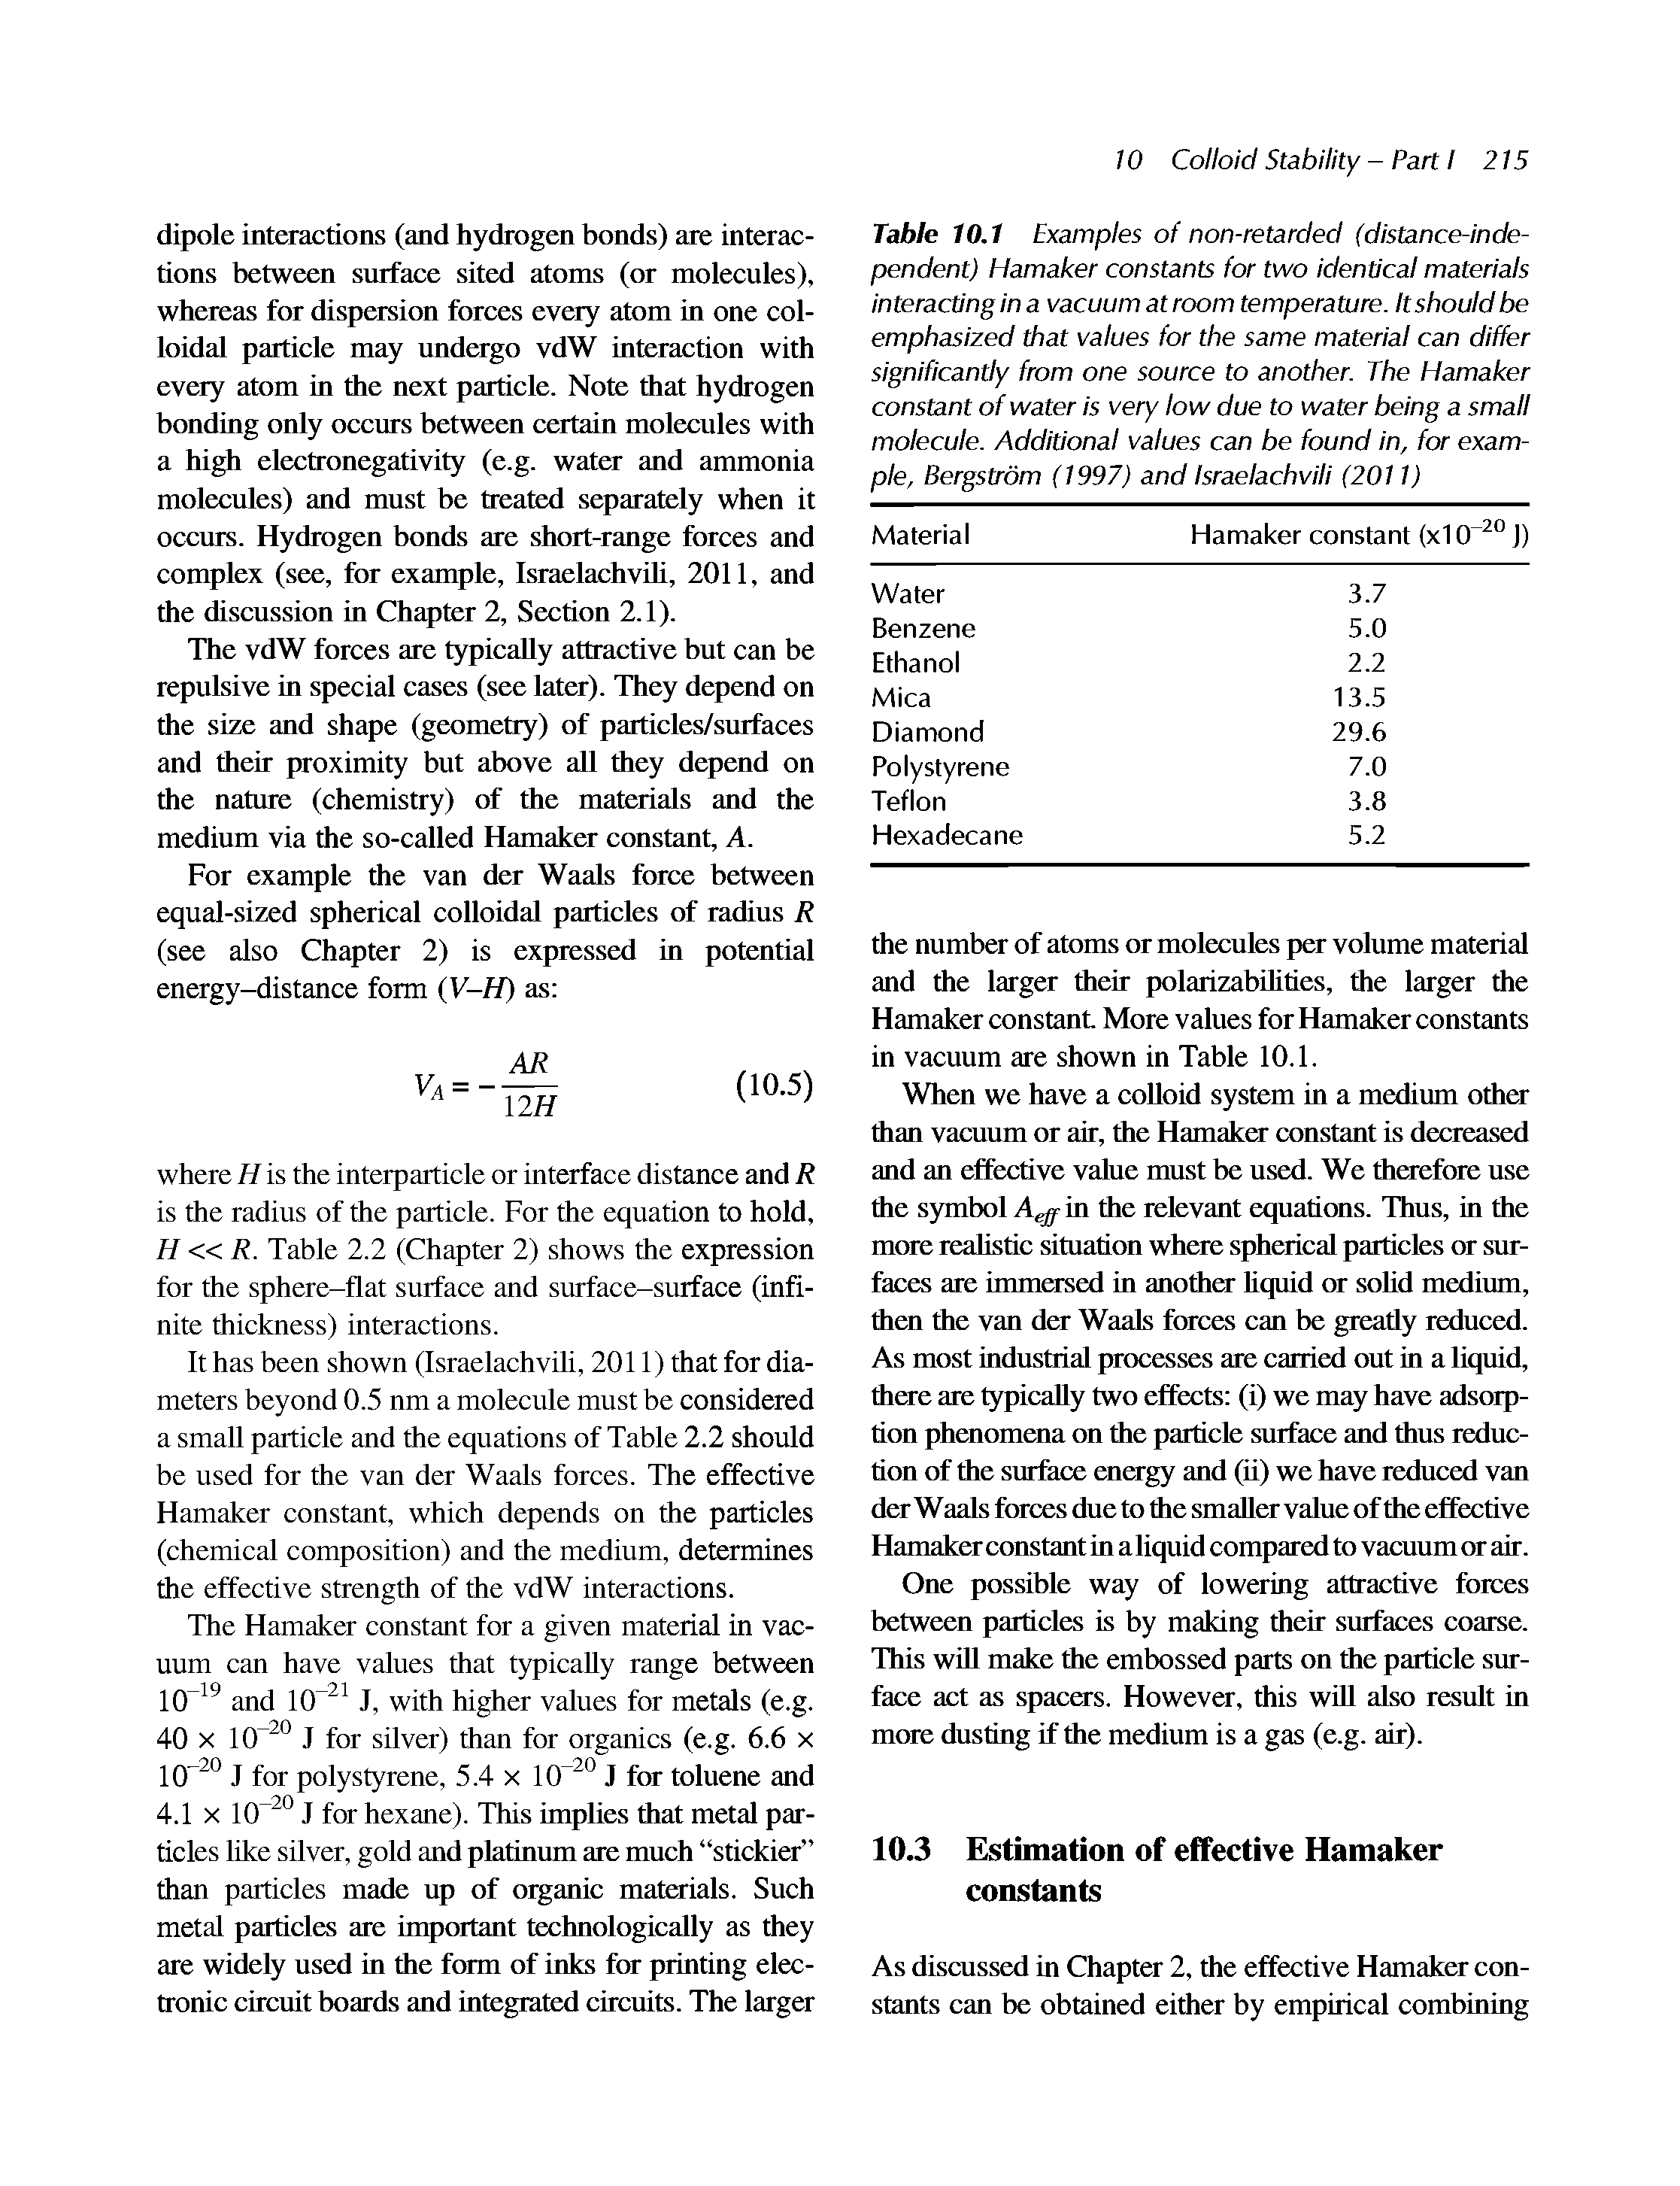 Table 10.1 Examples of non-retarded (distance-independent) Hamaker constants for two identical materials interacting in a vacuum at room temperature. It should be emphasized that values for the same material can differ significantly from one source to another. The Hamaker constant of water is very low due to water being a small molecule. Additional values can be found in, for example, Bergstrom (1997) and IsraelachvUi (2011)...